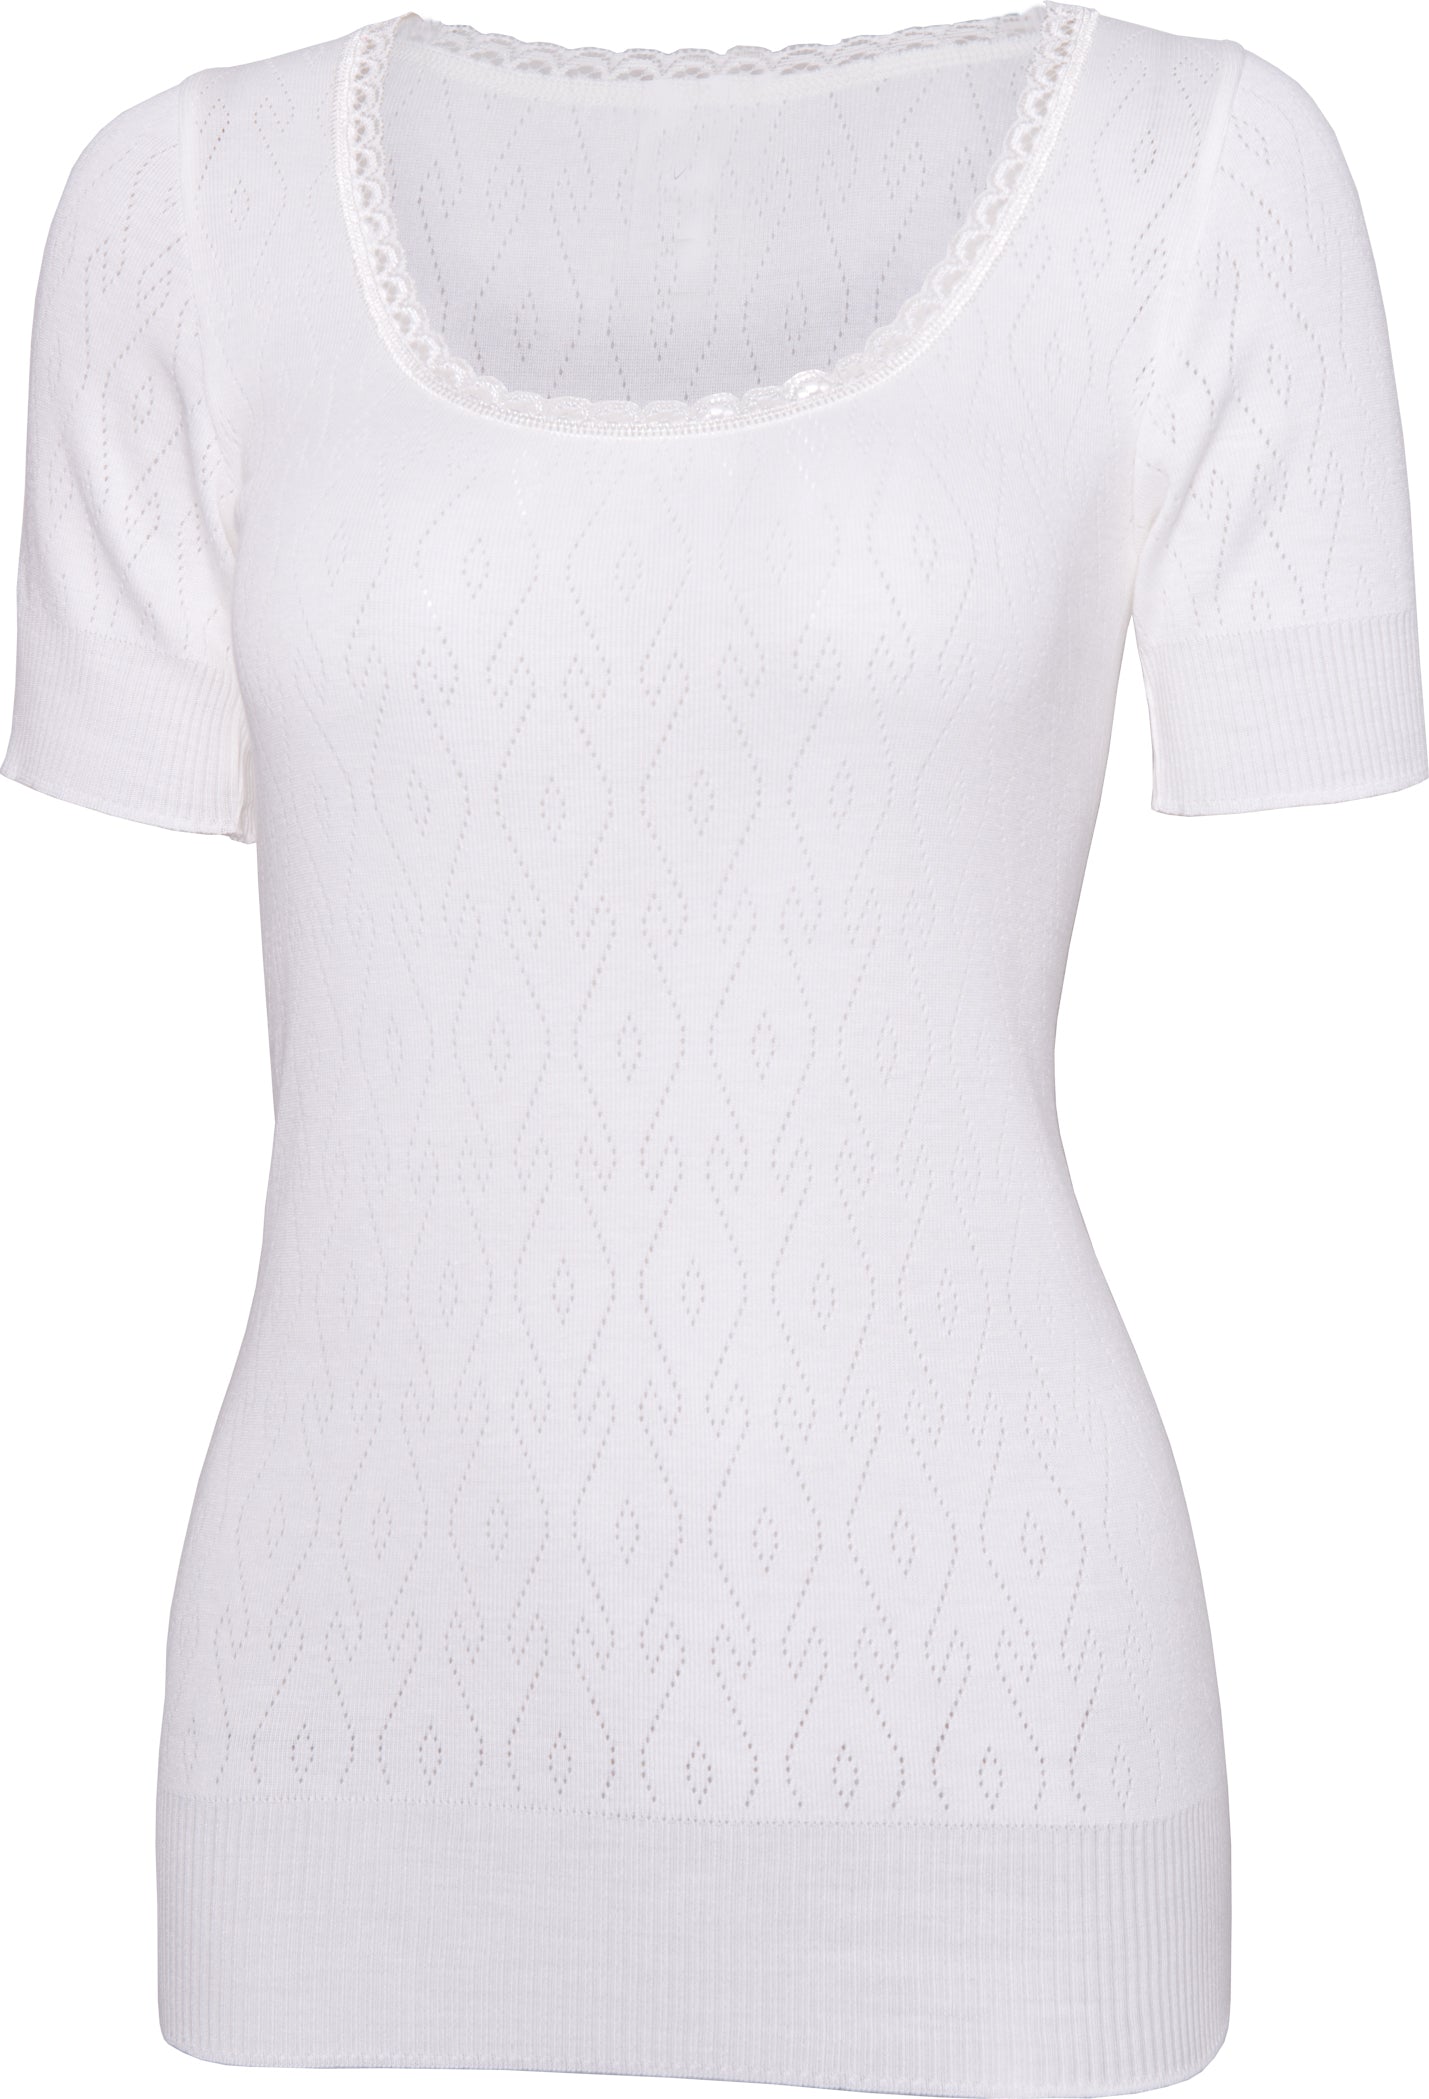 White Swan-Thermal Short Sleeve Vest Top-Style 302